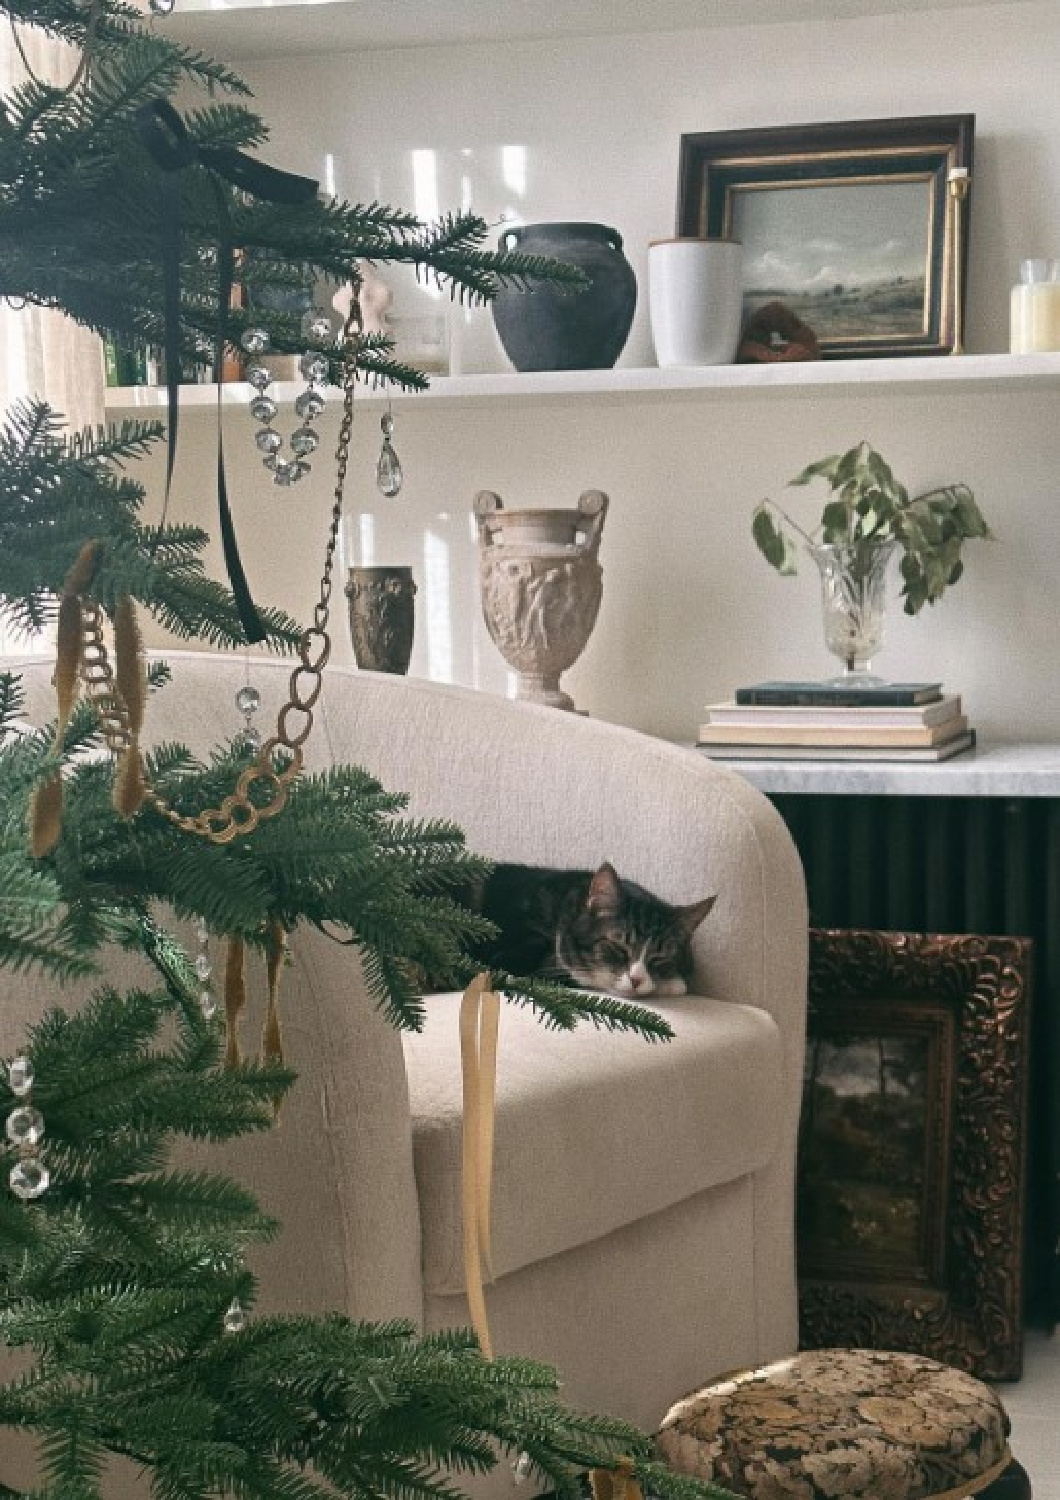 Cozy cat sleeping in serene French inspired holiday decorated home by Hummusbirrd. #frenchcountrychristmas